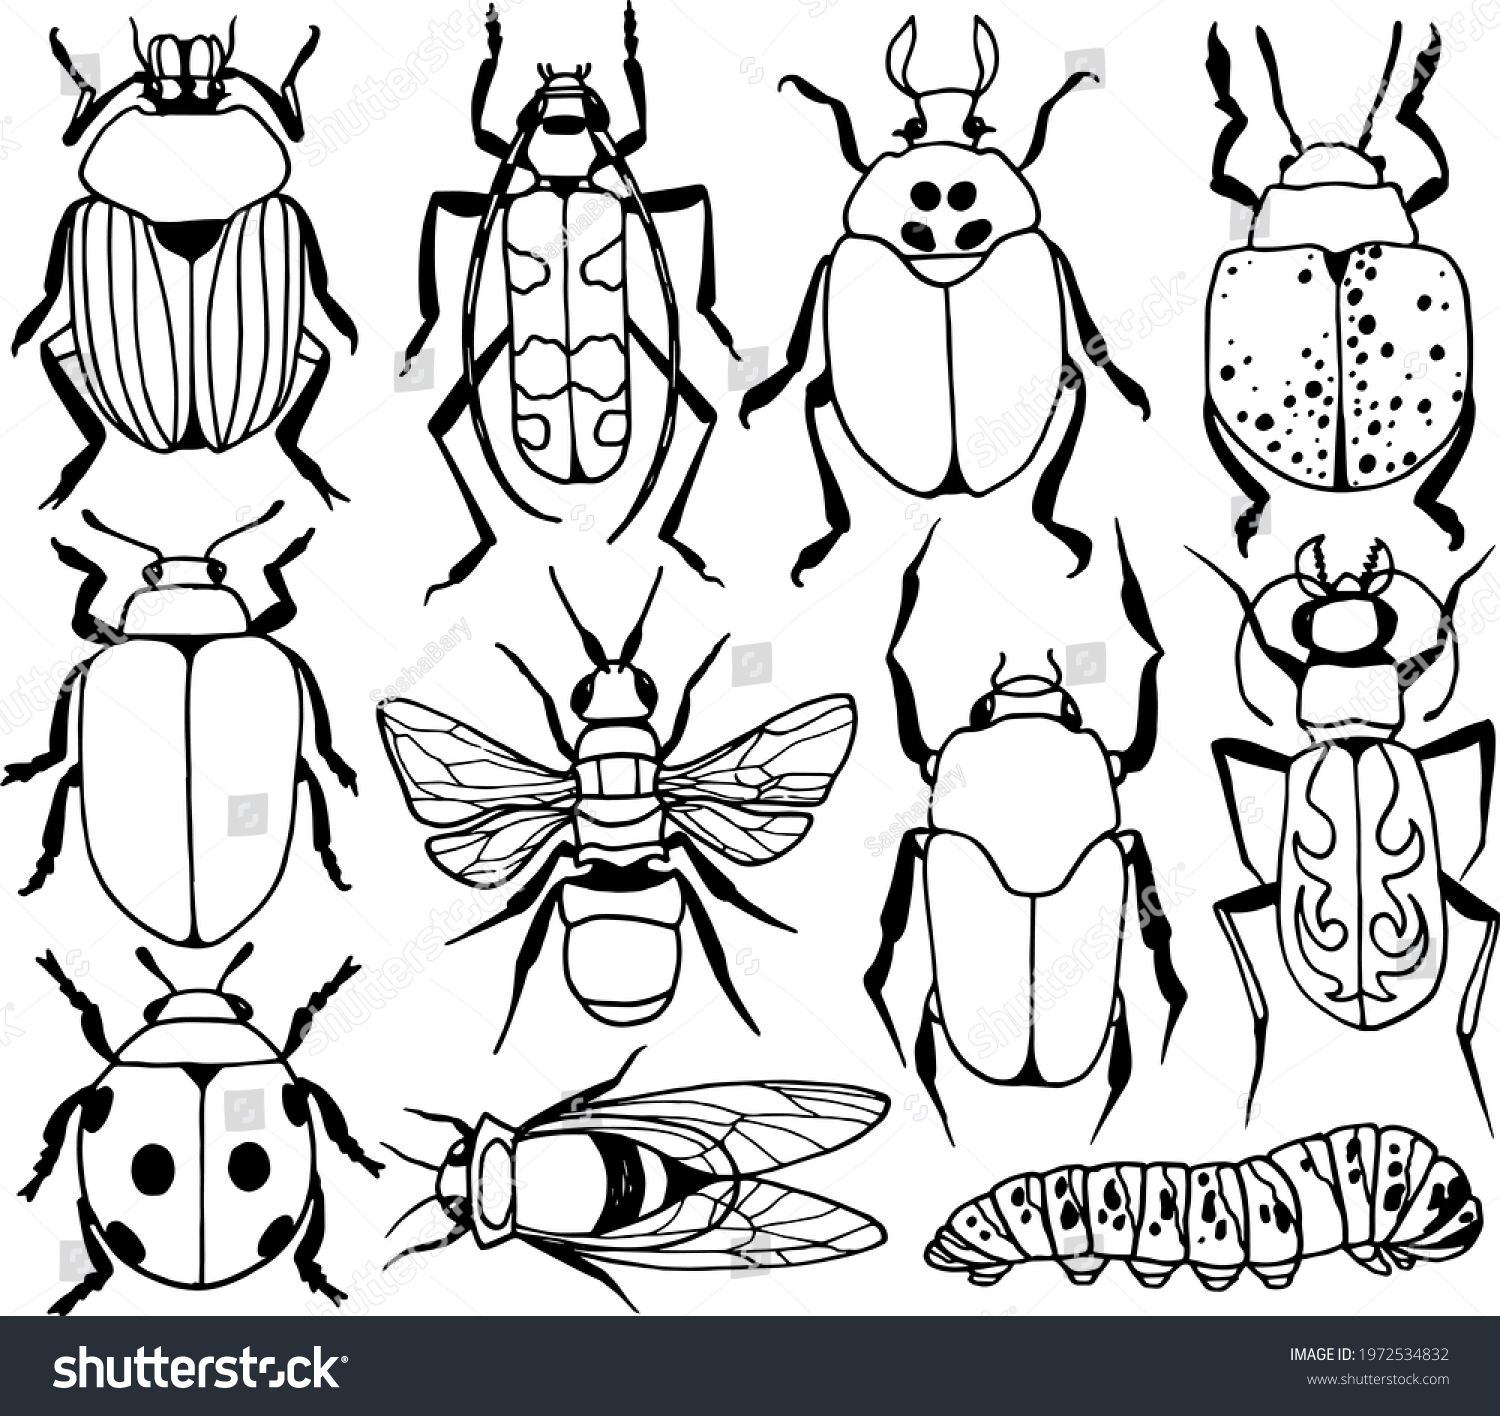 SVG of Insect collection isolated on white. Vector illustration. set of illustrations. pests, beetles, insects, animals. black and white image svg